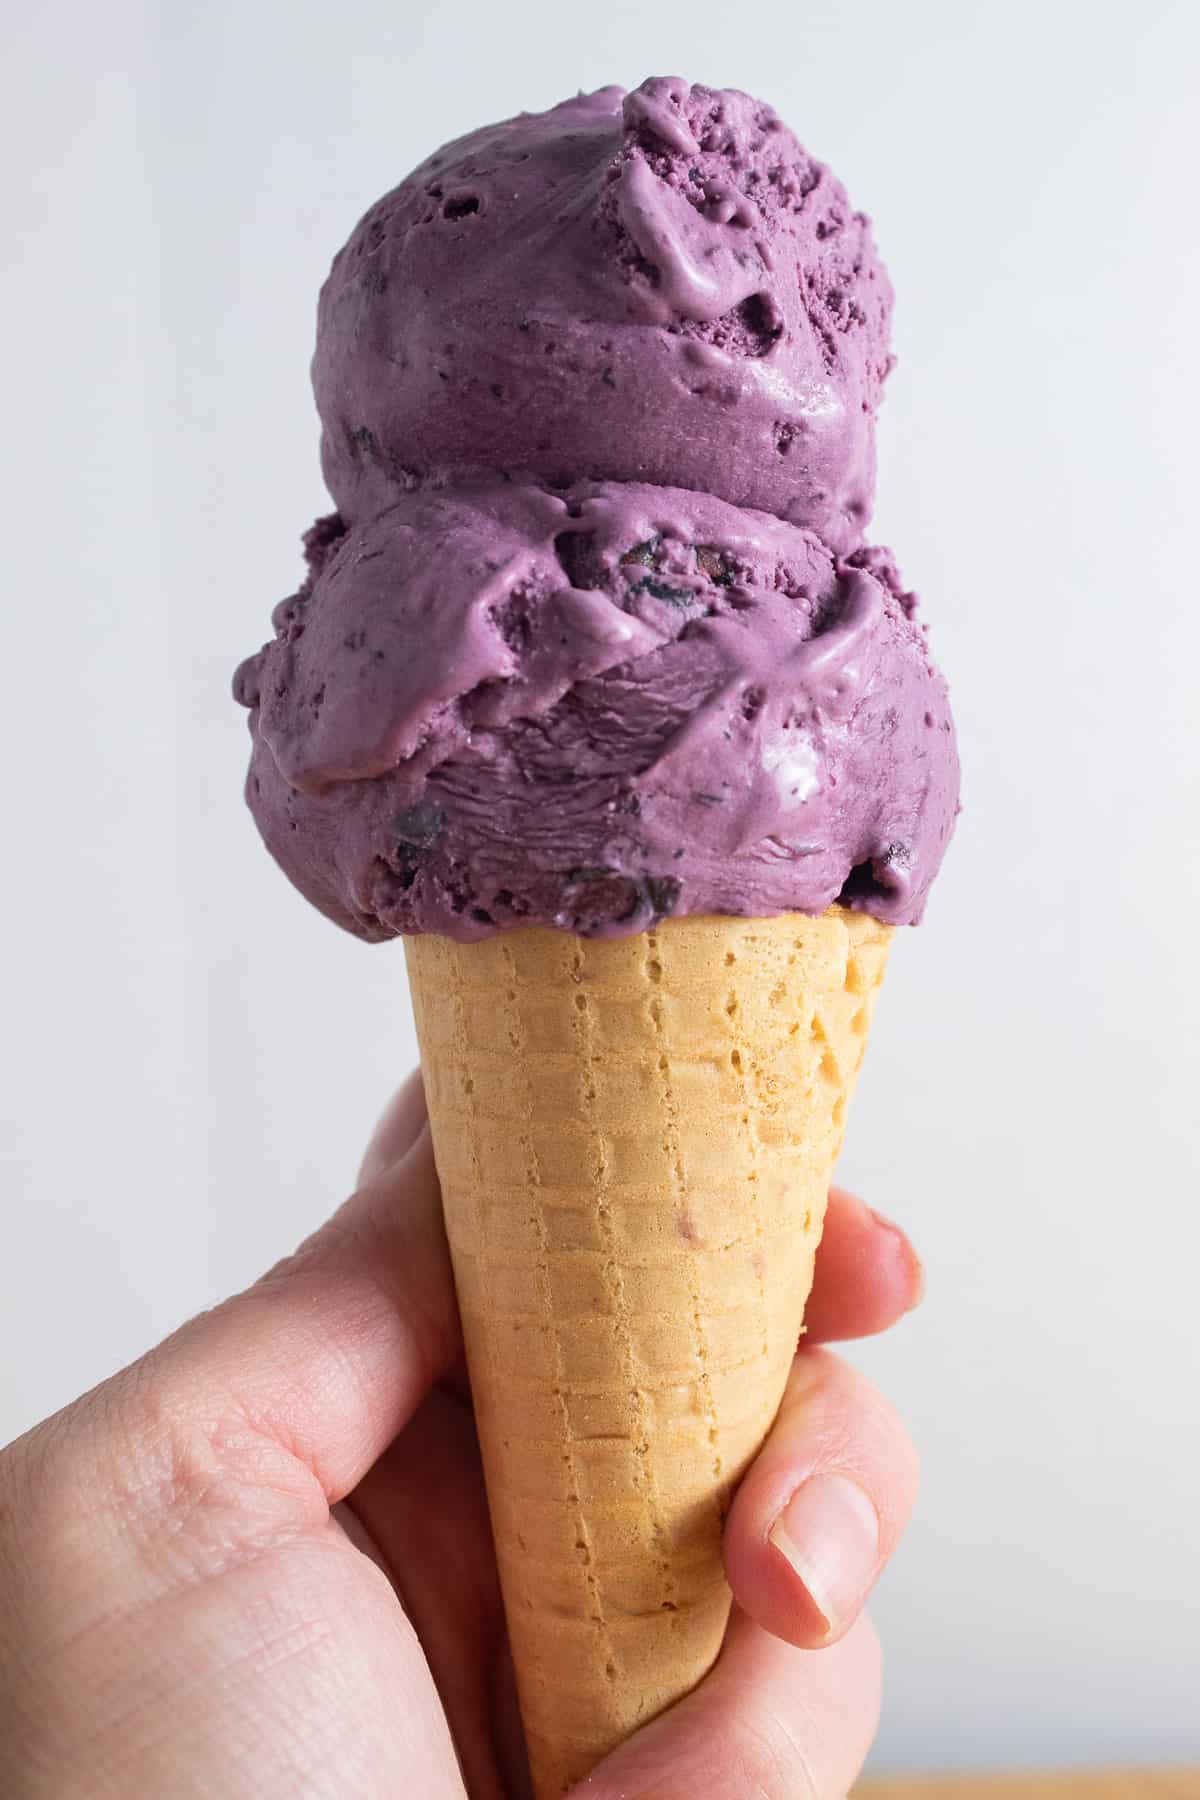 Two scoops of purple ice cream on a brown sugar cone being held by someone's left hand.